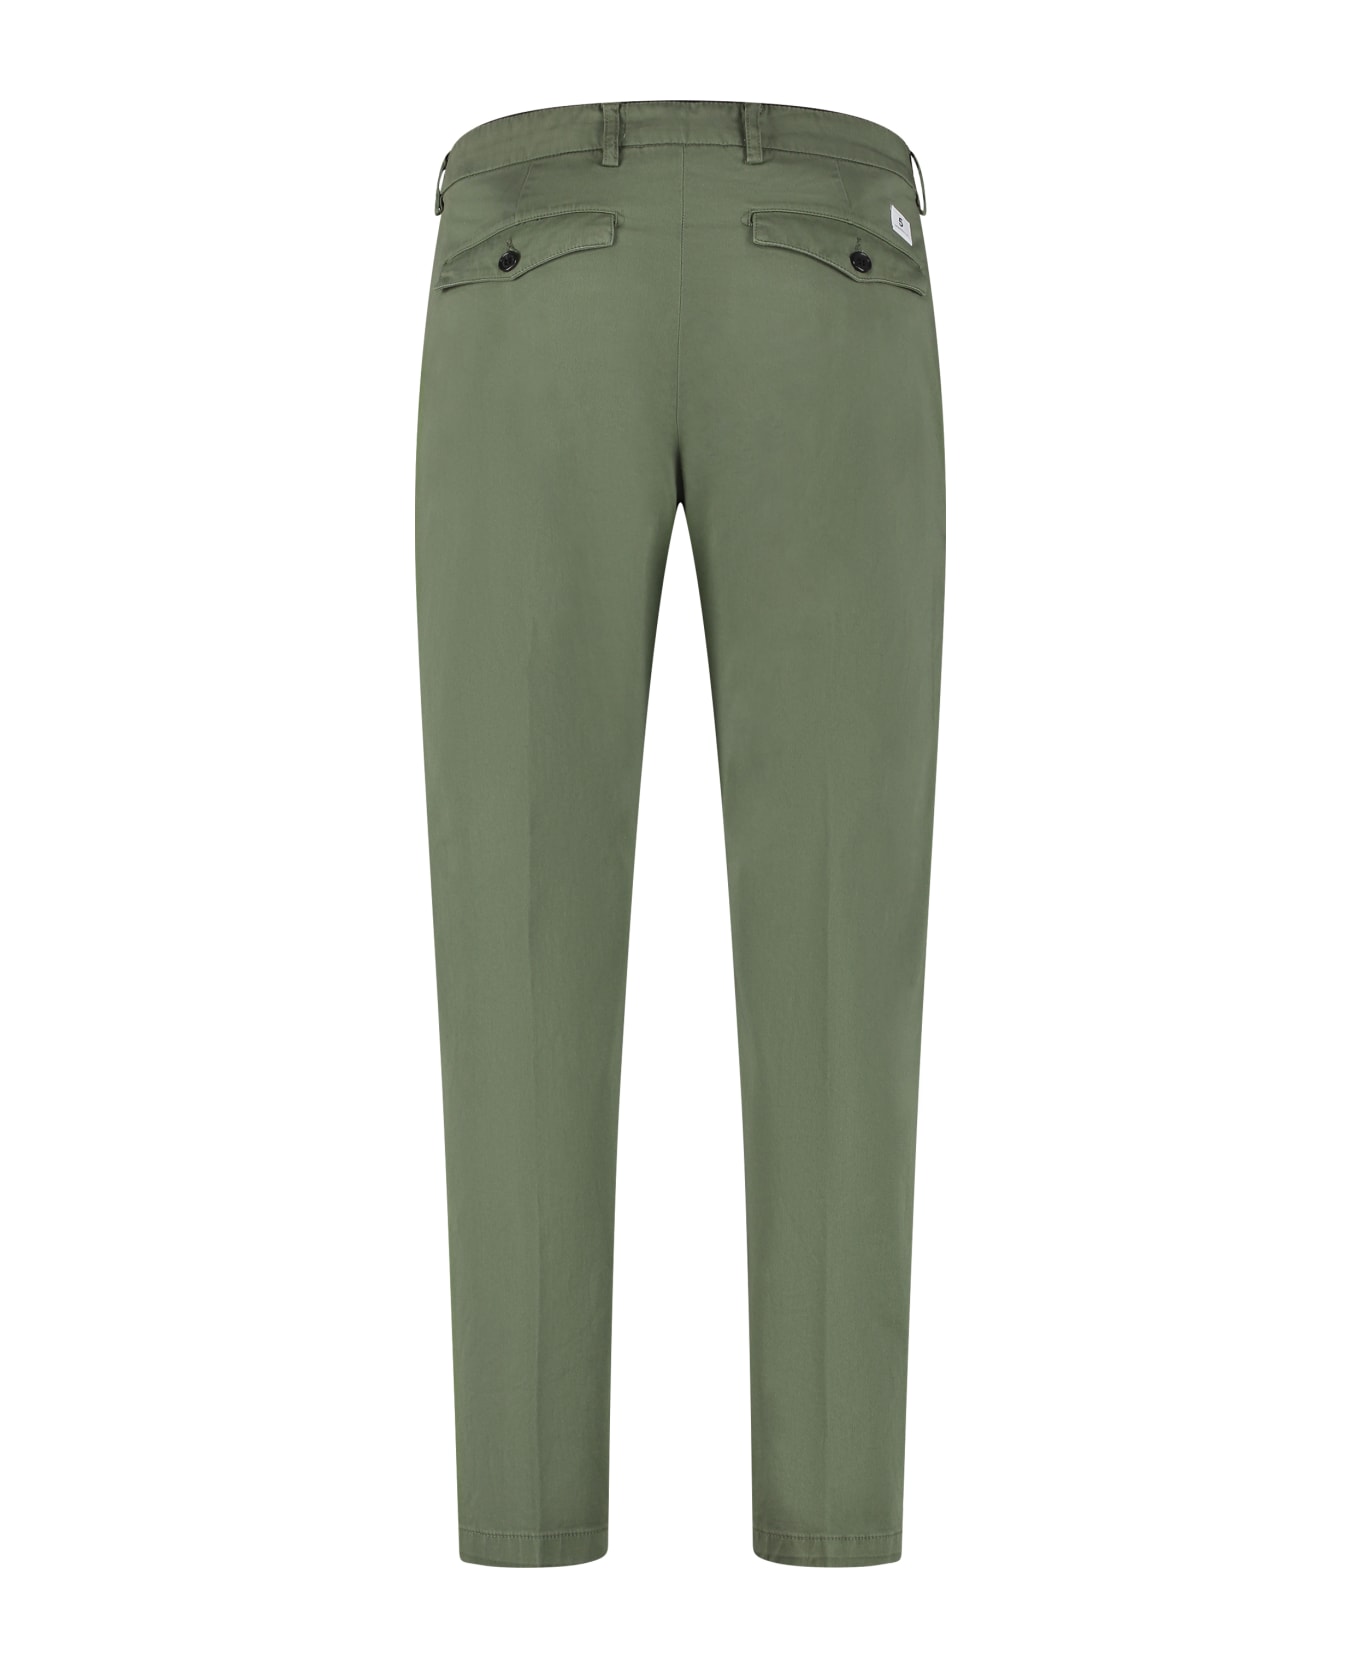 Department Five Prince Chino Pants - green ボトムス